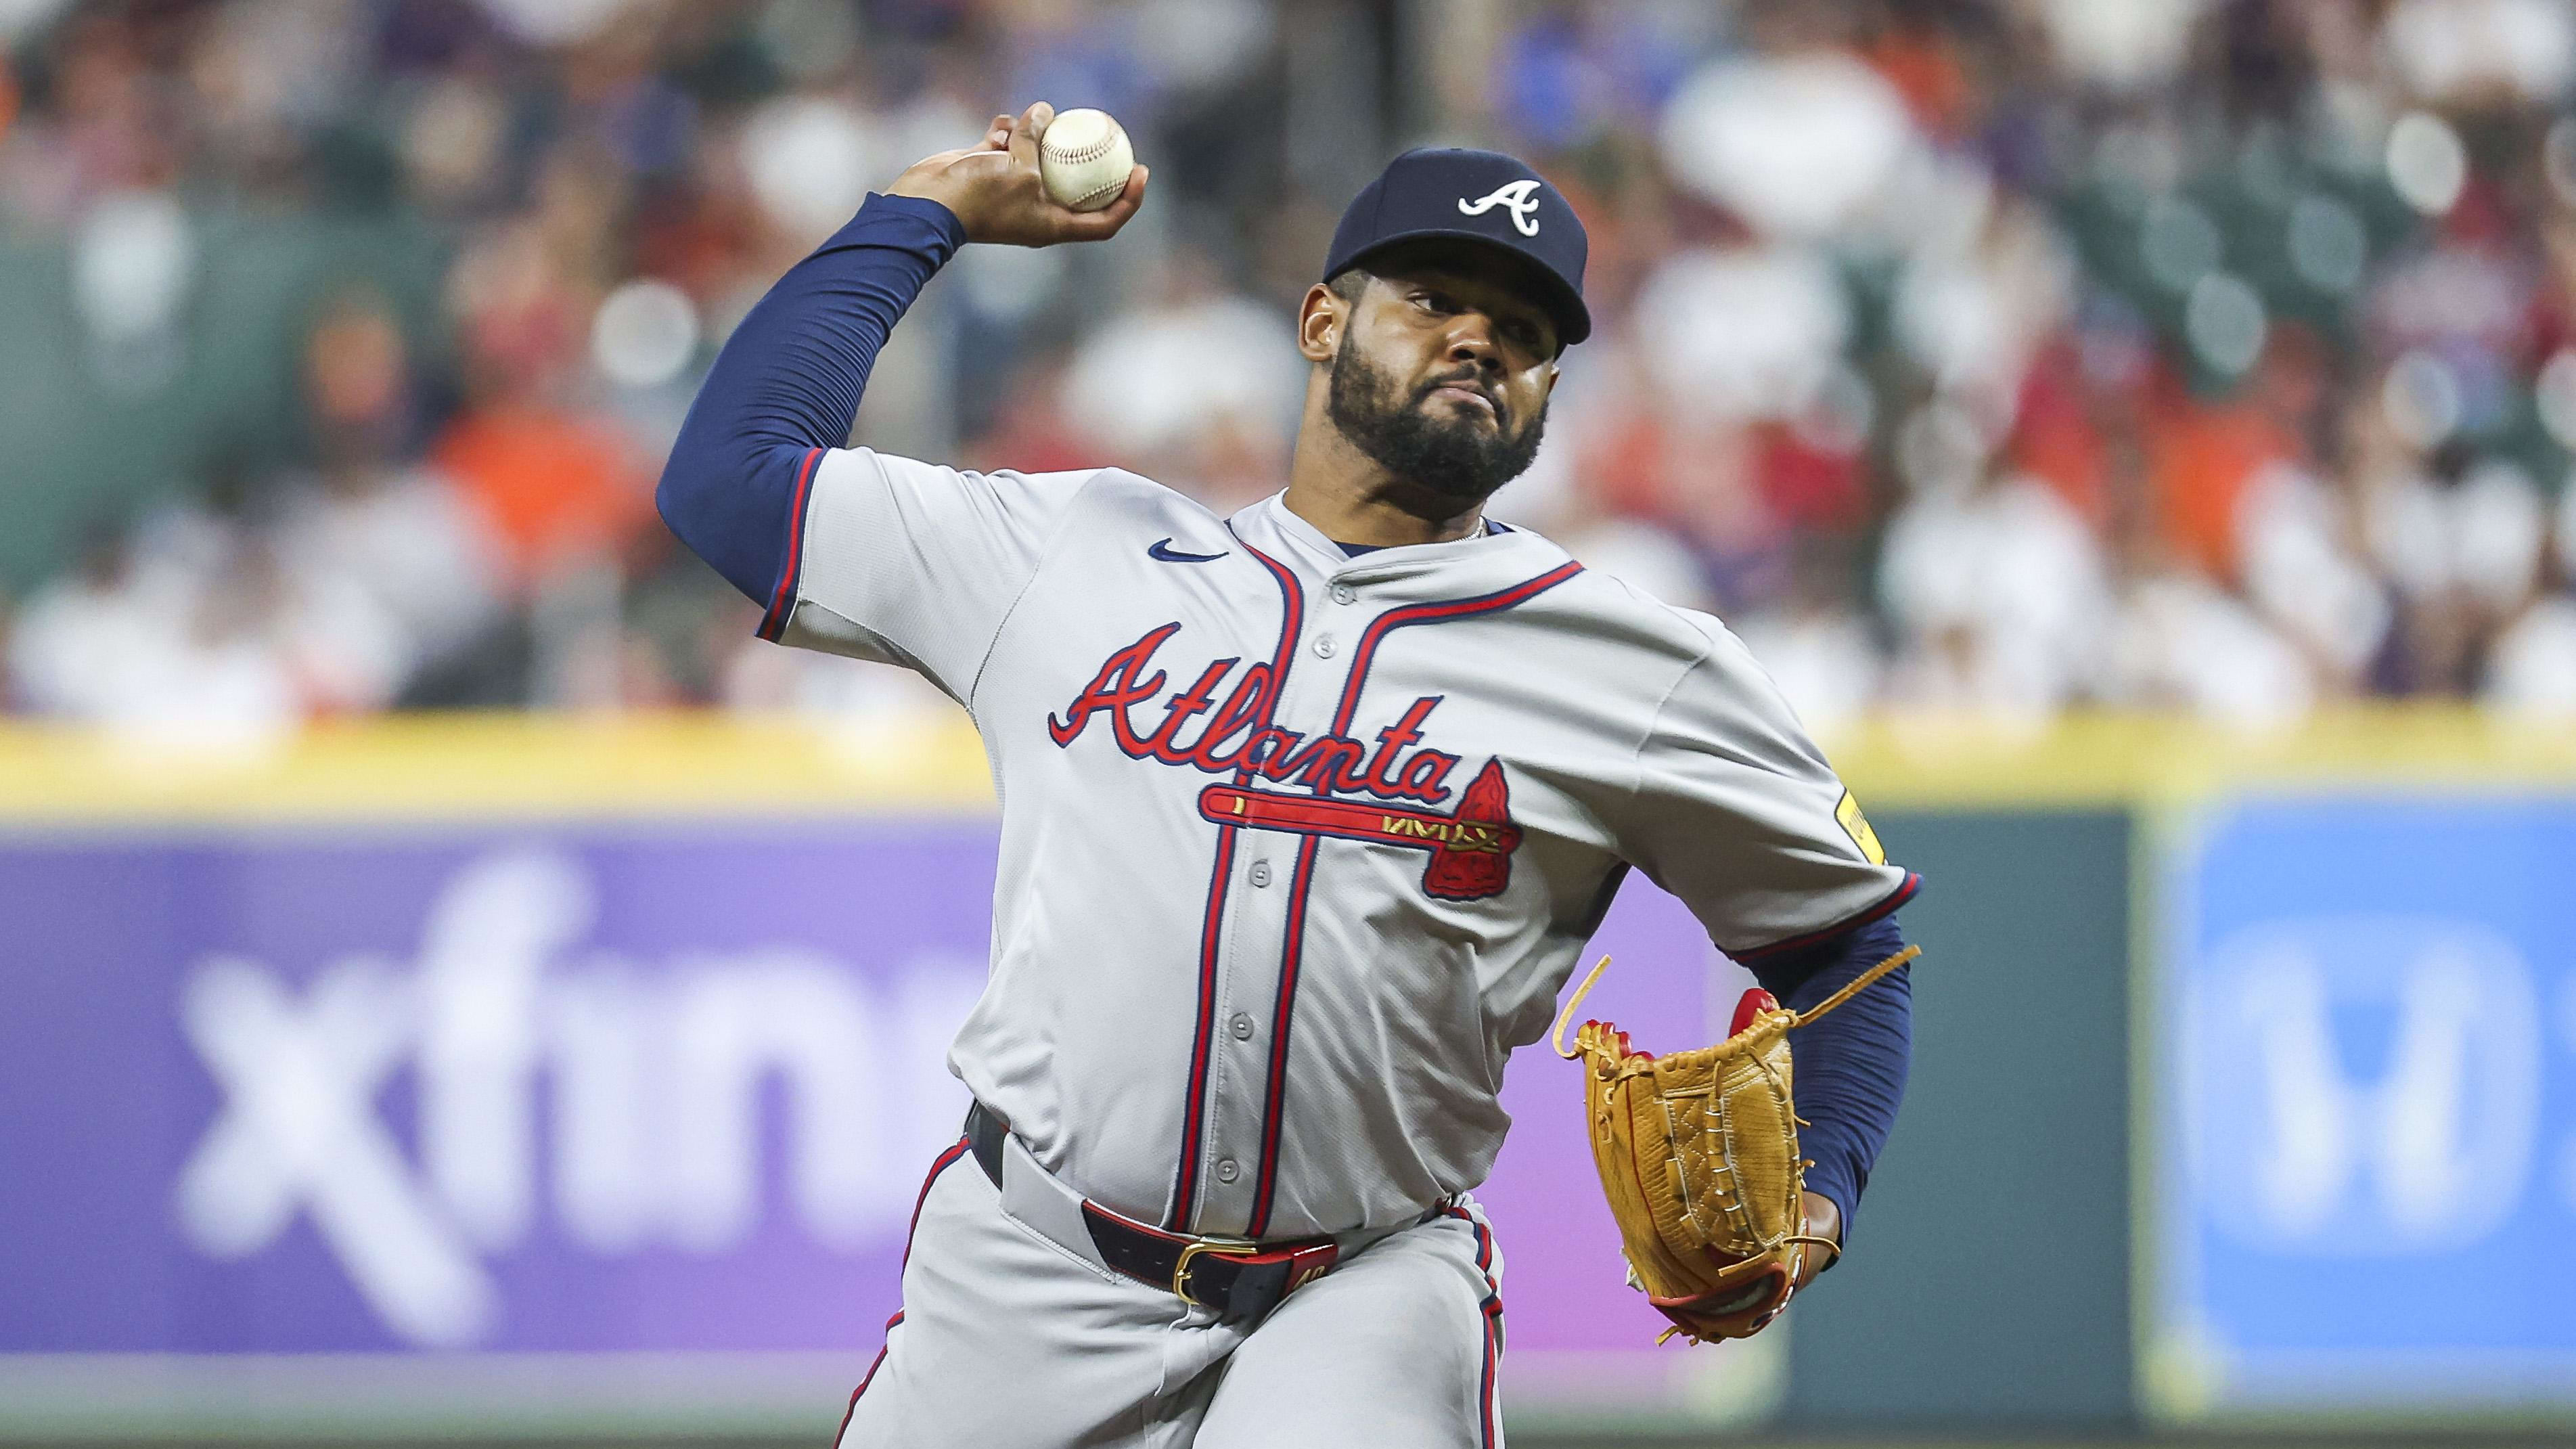 Atlanta’s Best Arm Snubbed by MLB’s Starting Pitcher Rankings 